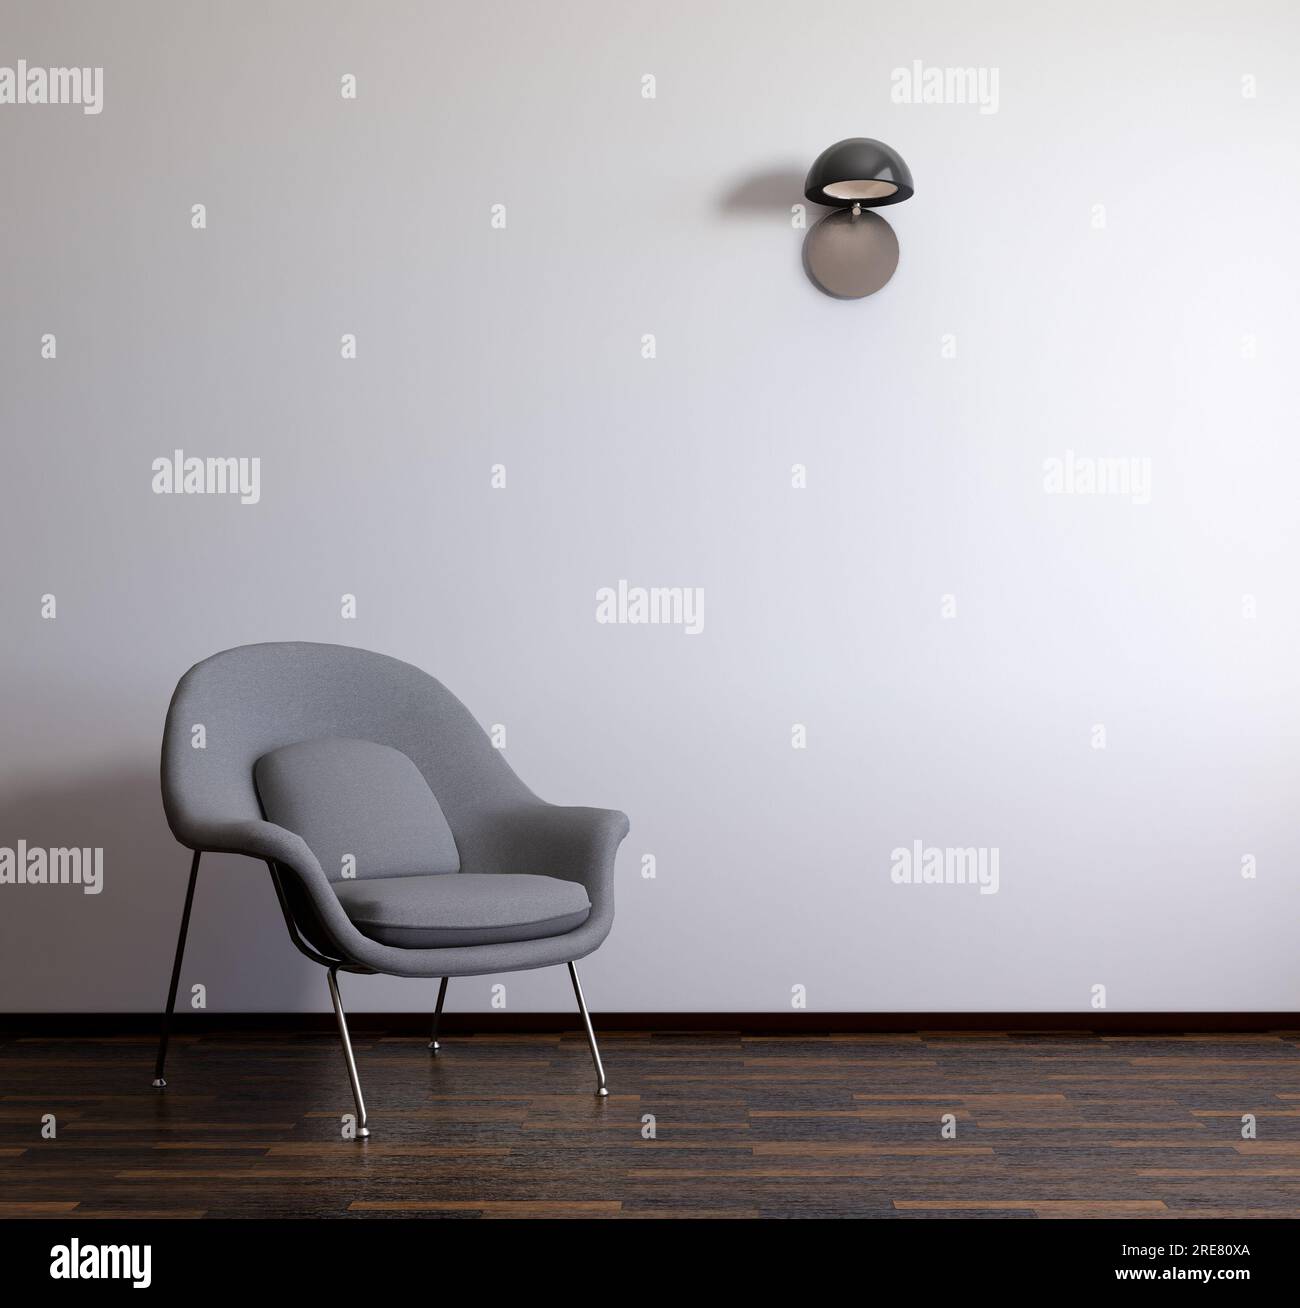 Simple and minimalist room with grey chair, blank wall mockup, 3d render Stock Photo